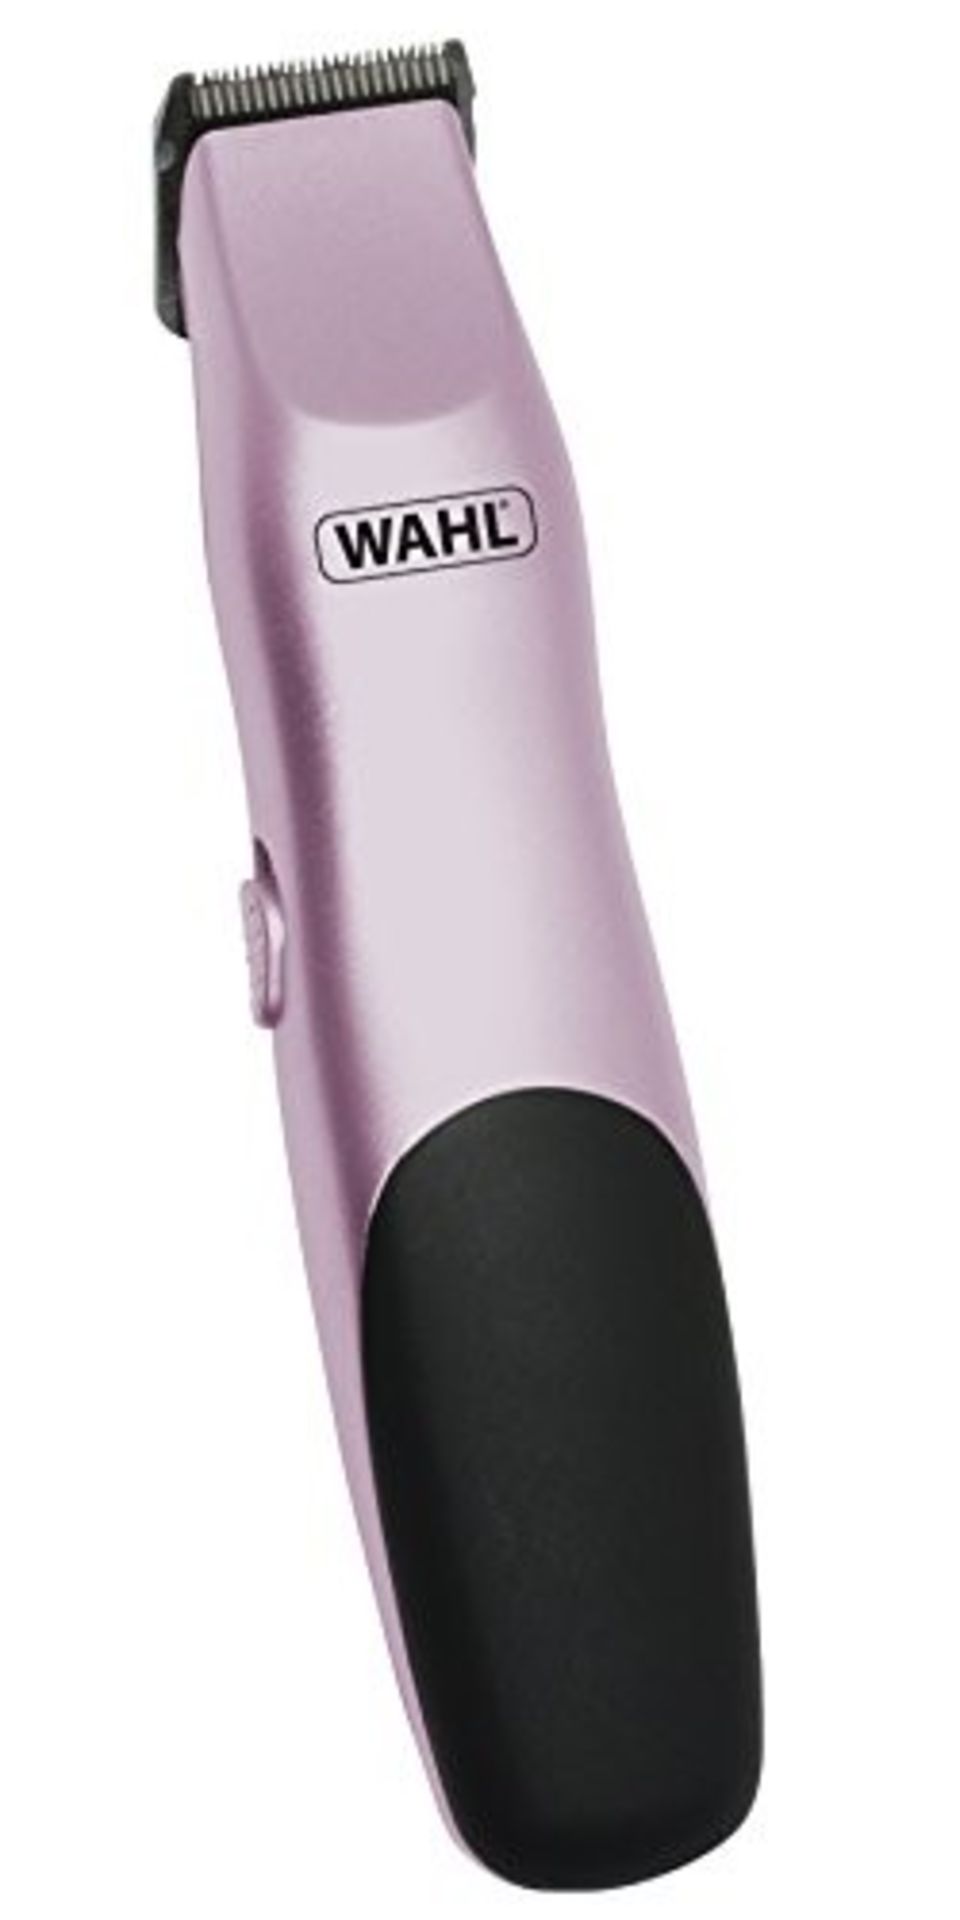 COMBINED RRP £118.00 LOT TO CONTAIN 8 ASSORTED Personal Care Appliances: GroomEase, Wahl, Wahl, - Image 8 of 9